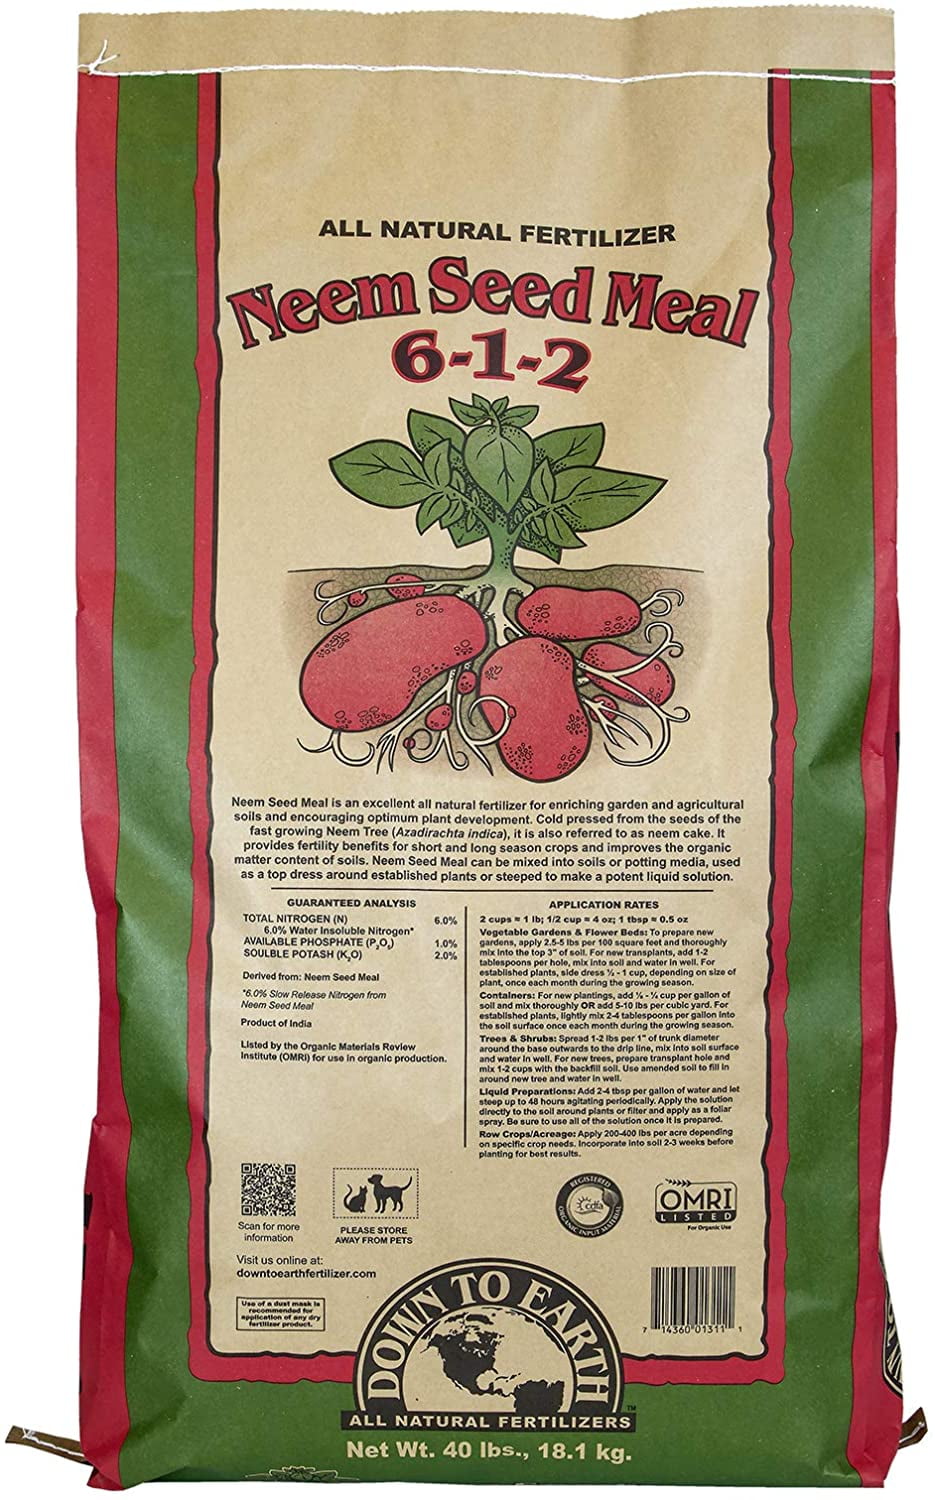 Made in USA 30 Lb Bag Recycled Cotton Seed Granular Sorbent Oil Only 